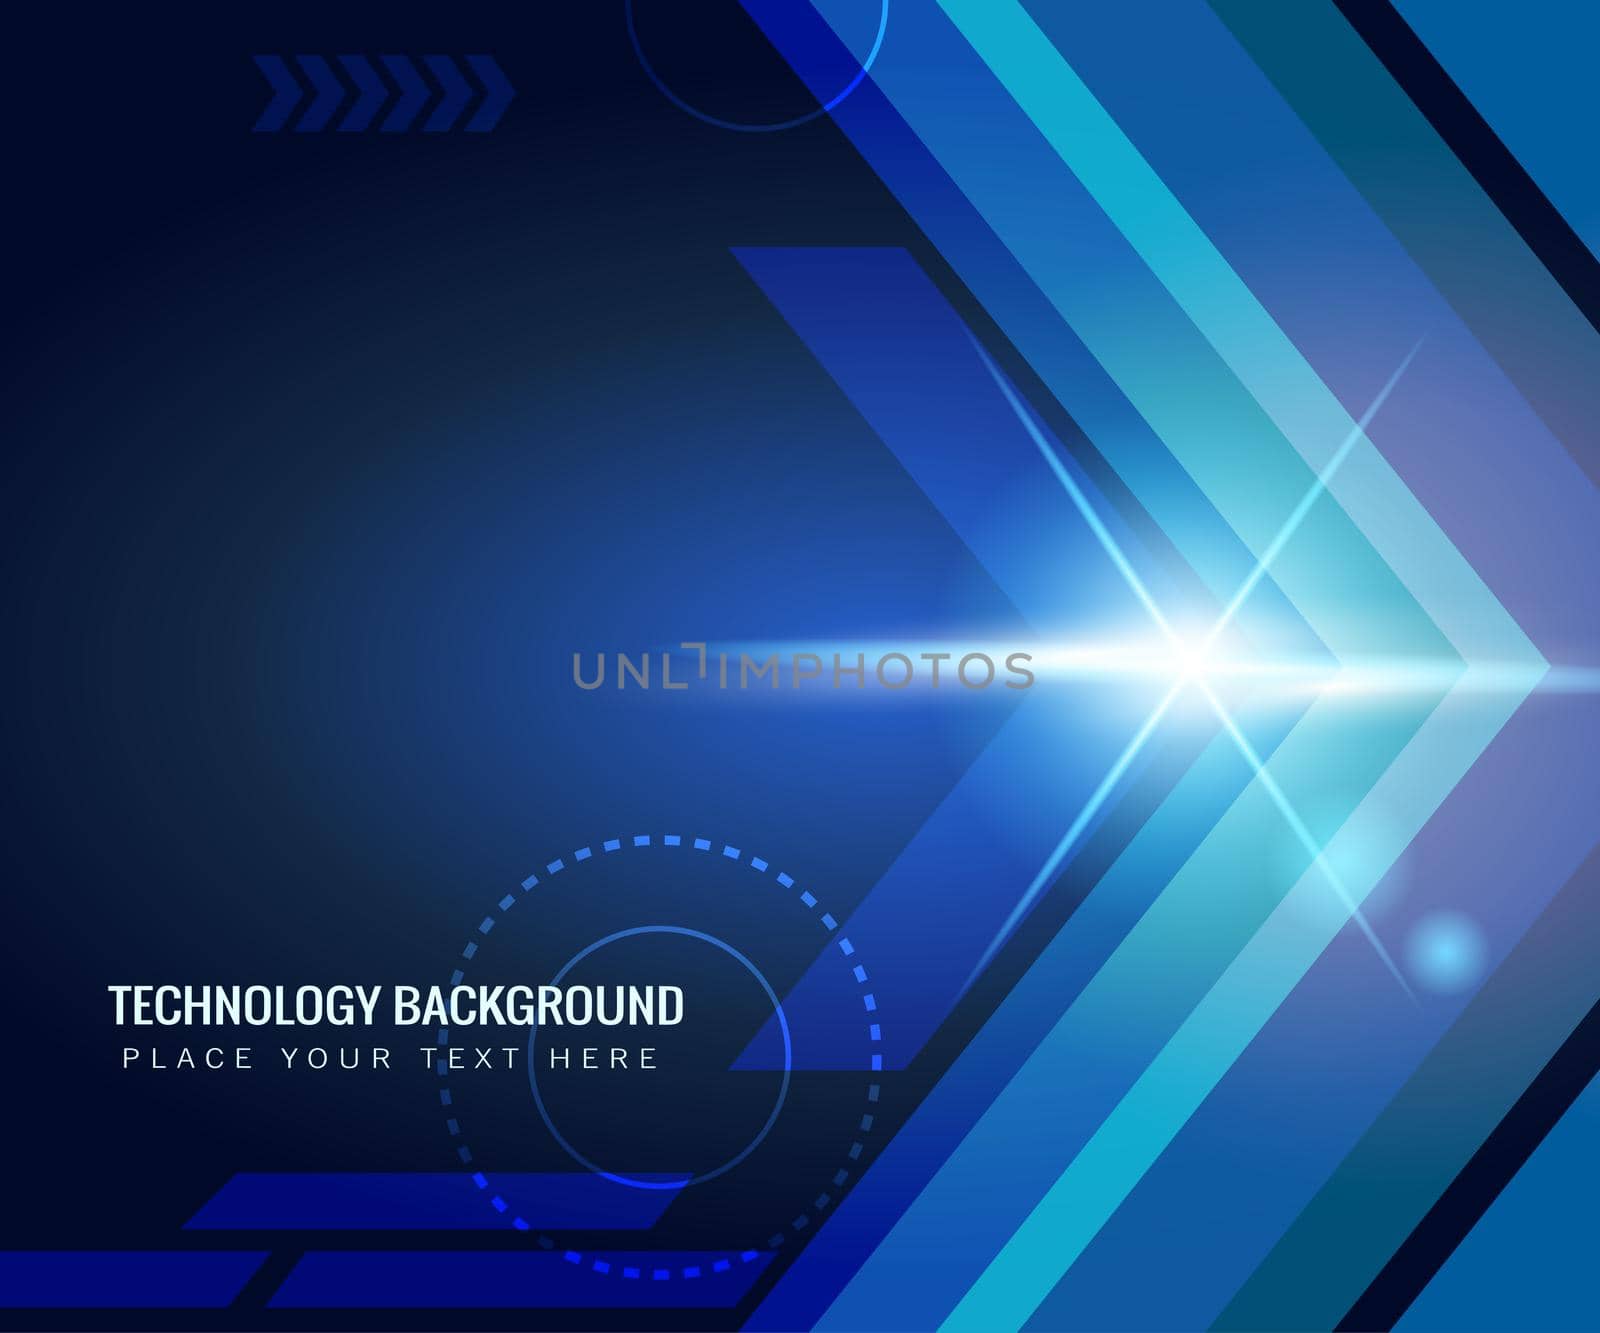 Abstract shiny technology lines and light vector background. Eps 10